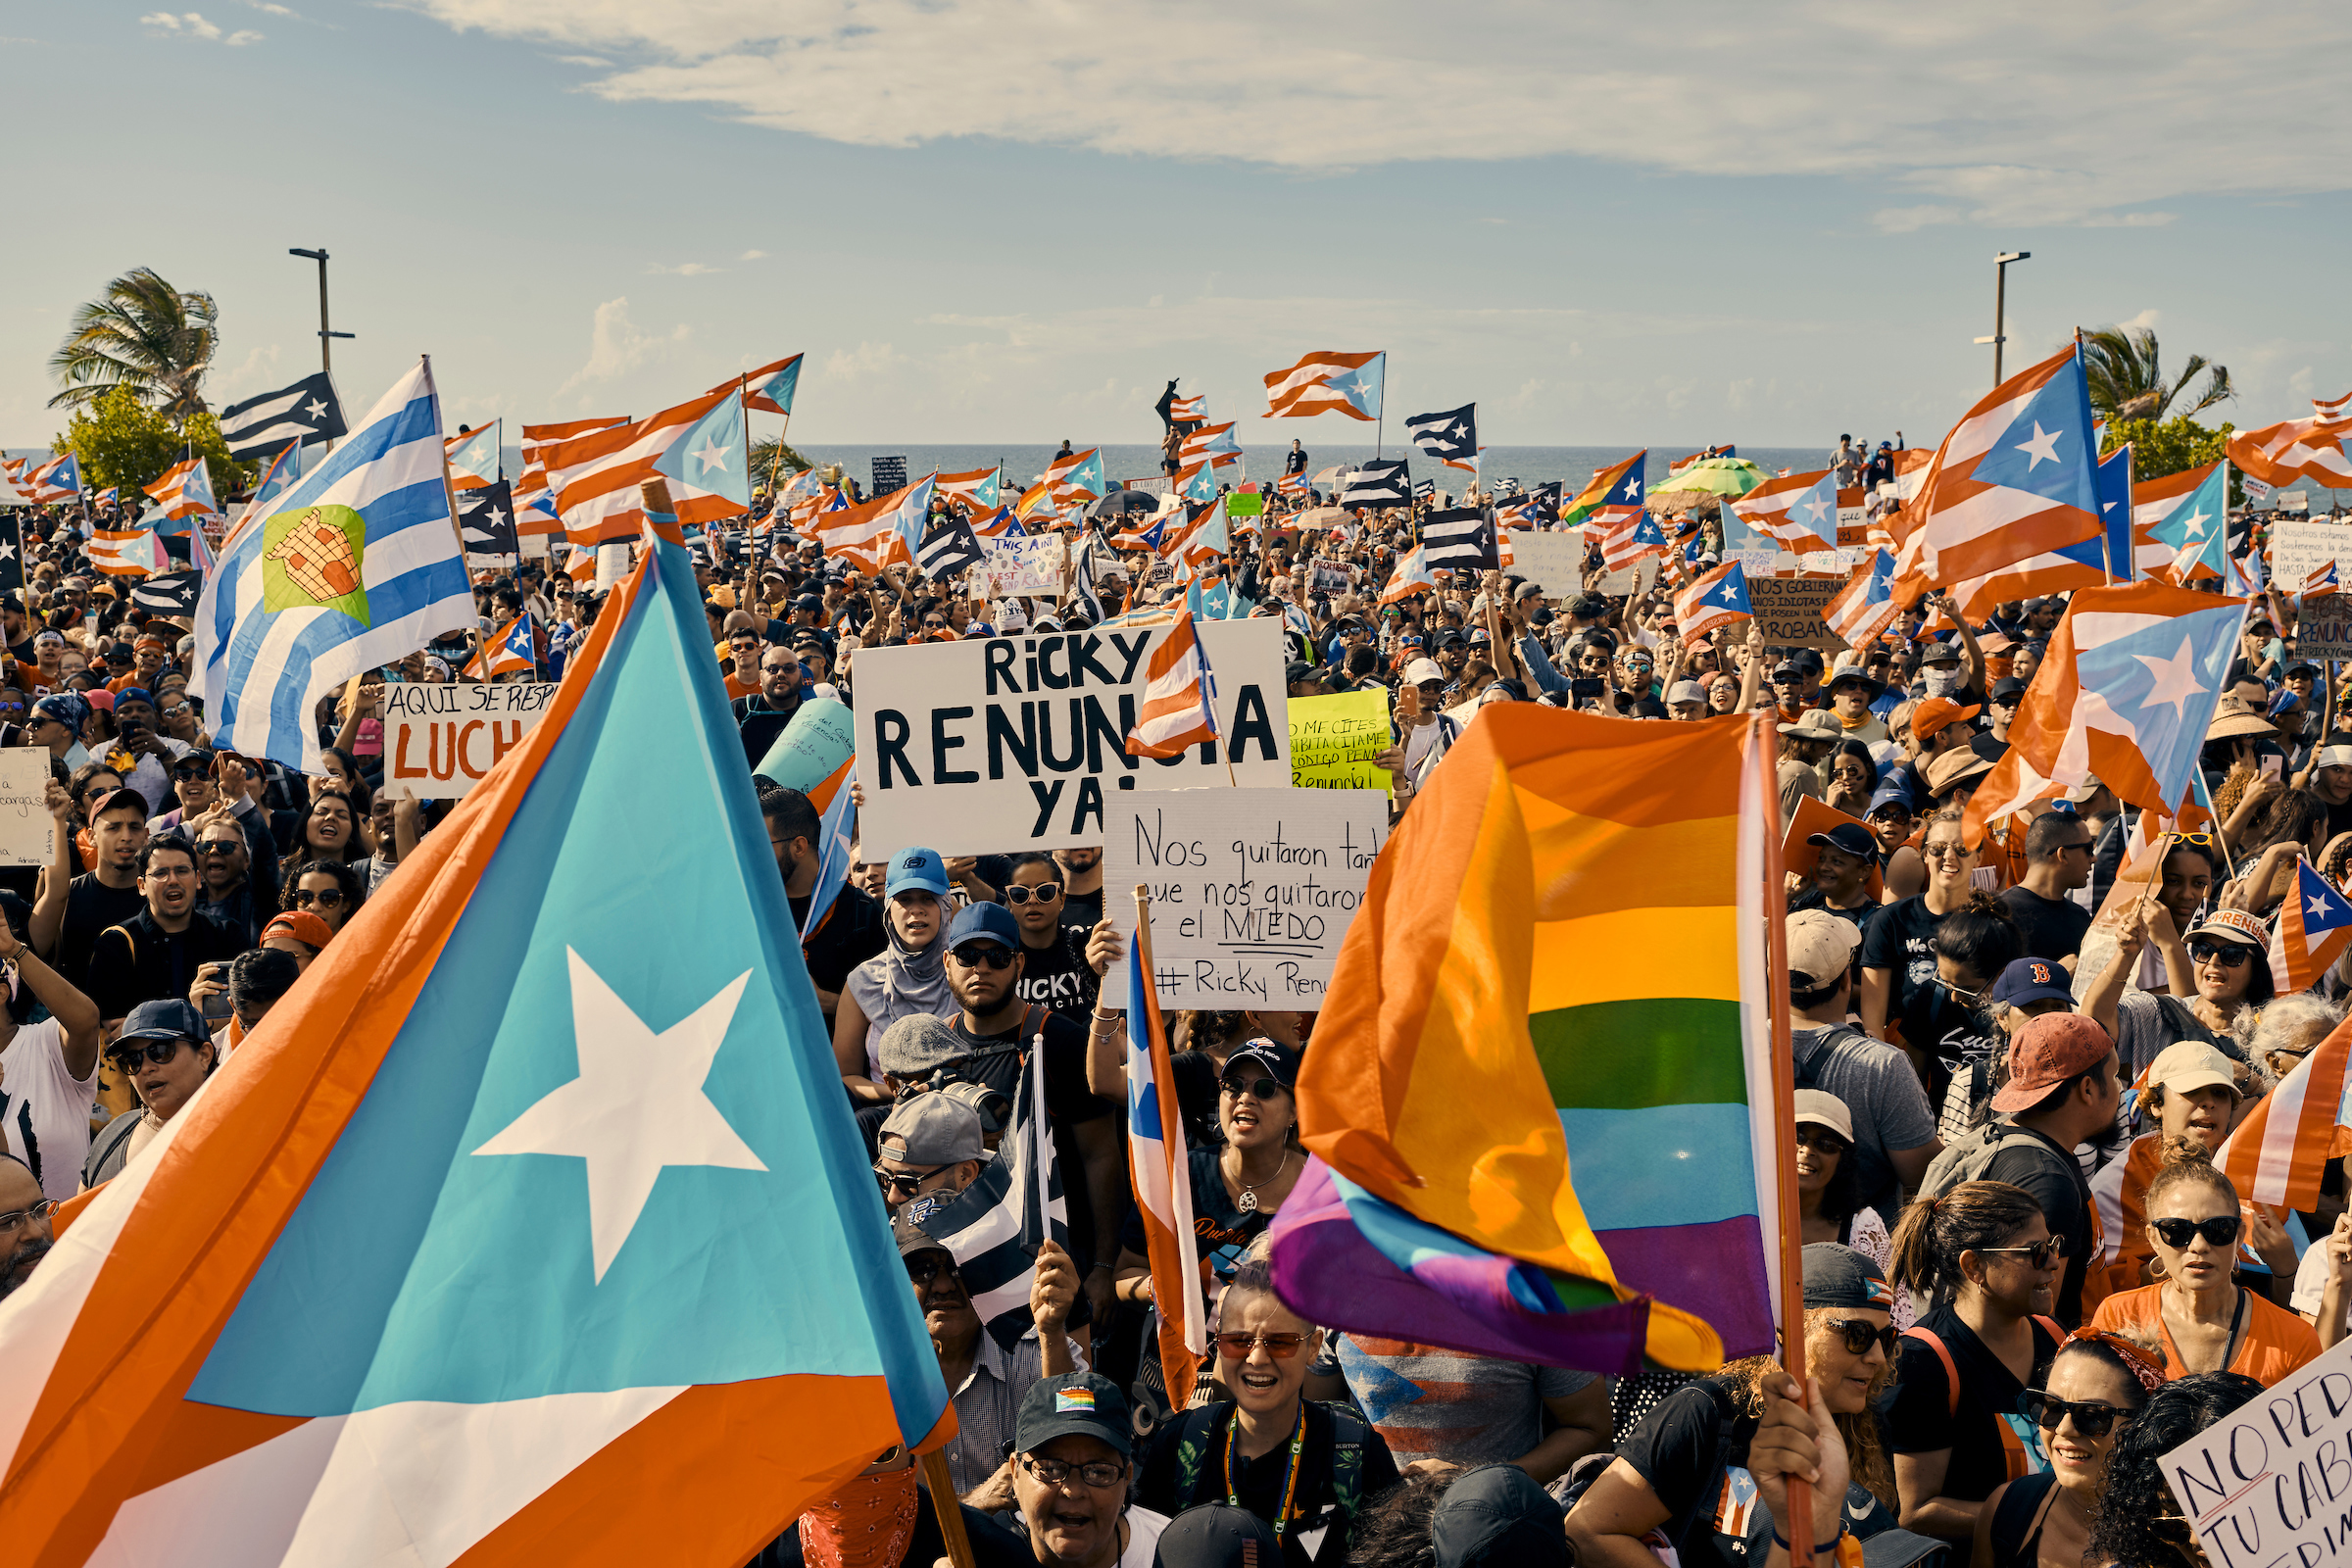 Protesters demanding #RickyRenuncia—a hashtagged request for the governor's resignation—took to the streets of San Juan on July 17, 2019.